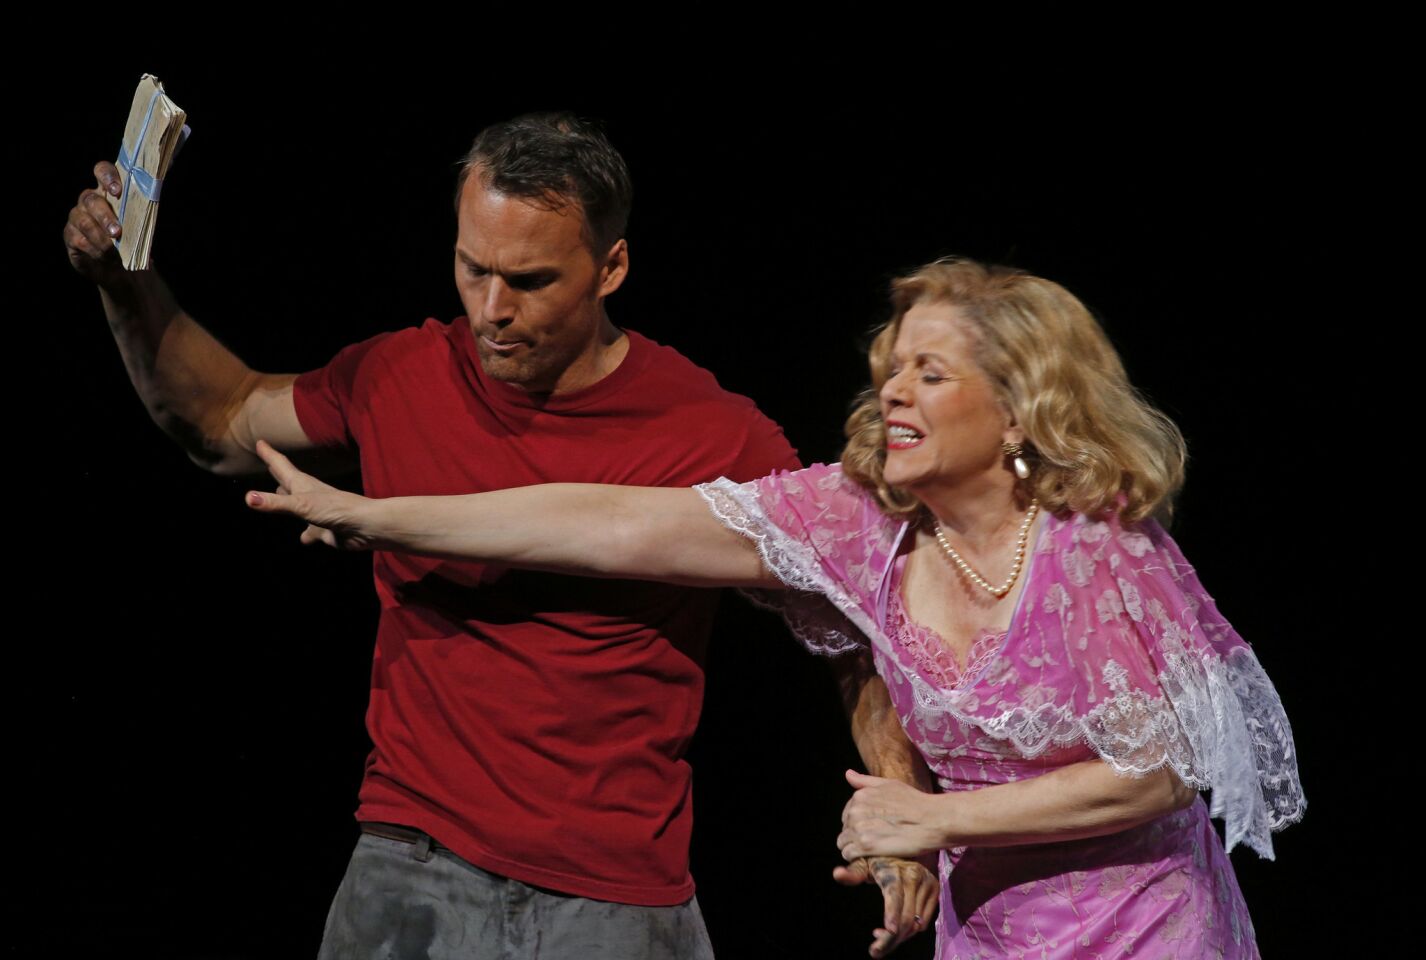 Arts and culture in pictures by The Times | 'A Streetcar Named Desire'